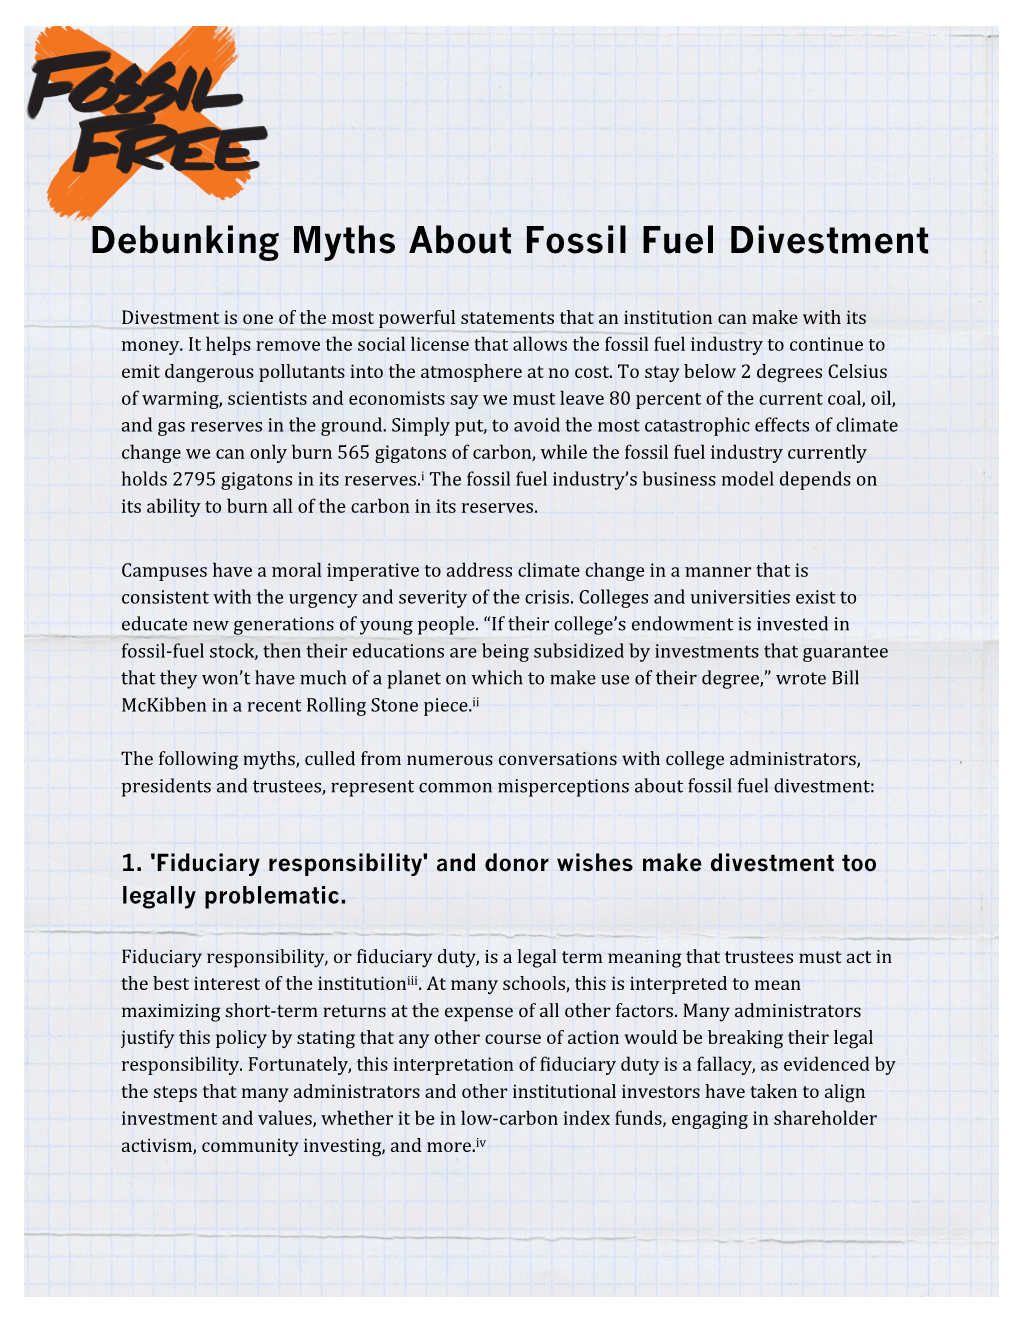 Debunking Myths About Fossil Fuel Divestment